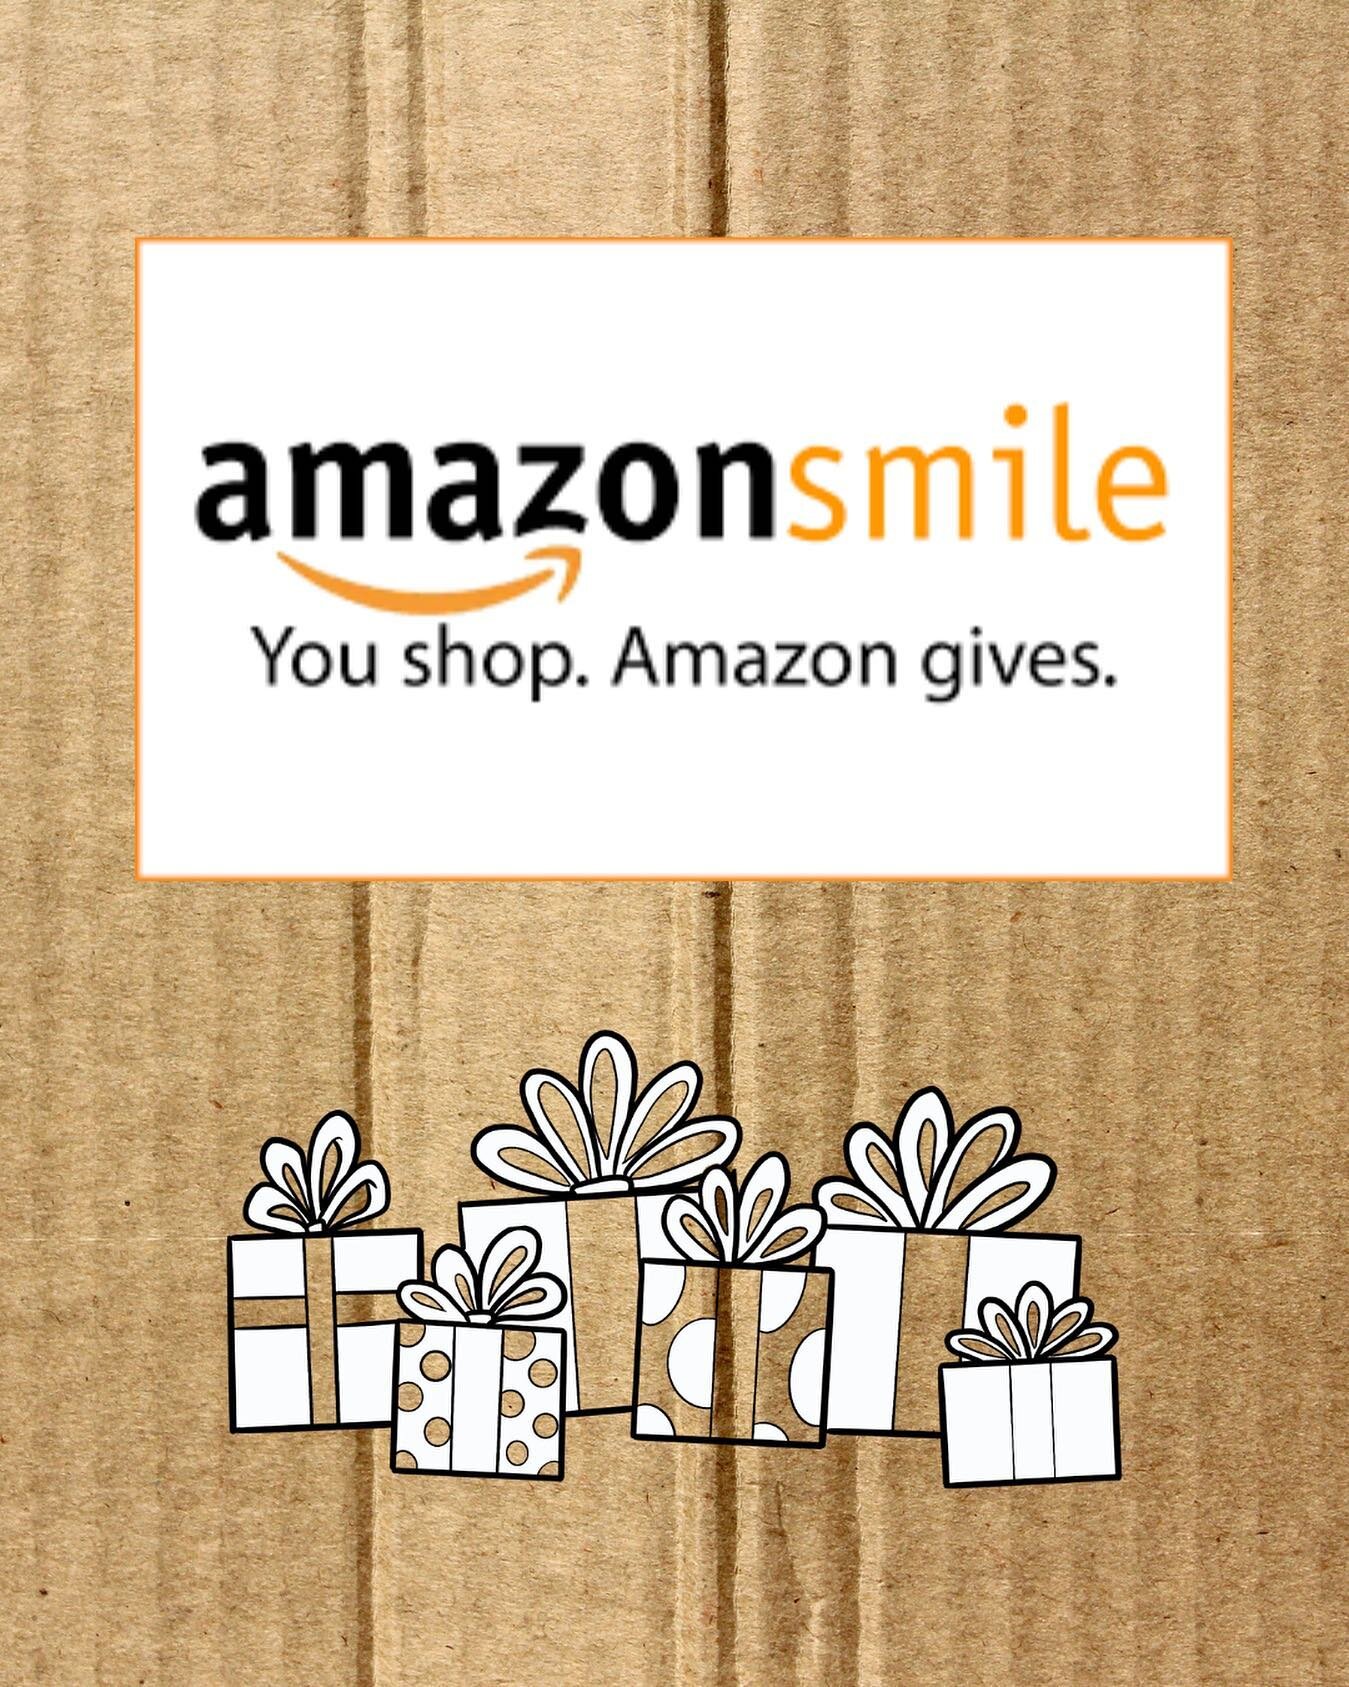 Have any online holiday shopping planned? With NWC as your chosen charity, the AmazonSmile Foundation will donate 0.5% of your purchase price to NWC every time you shop. Please click this link in our story, or visit our website, to ensure the NWC is 